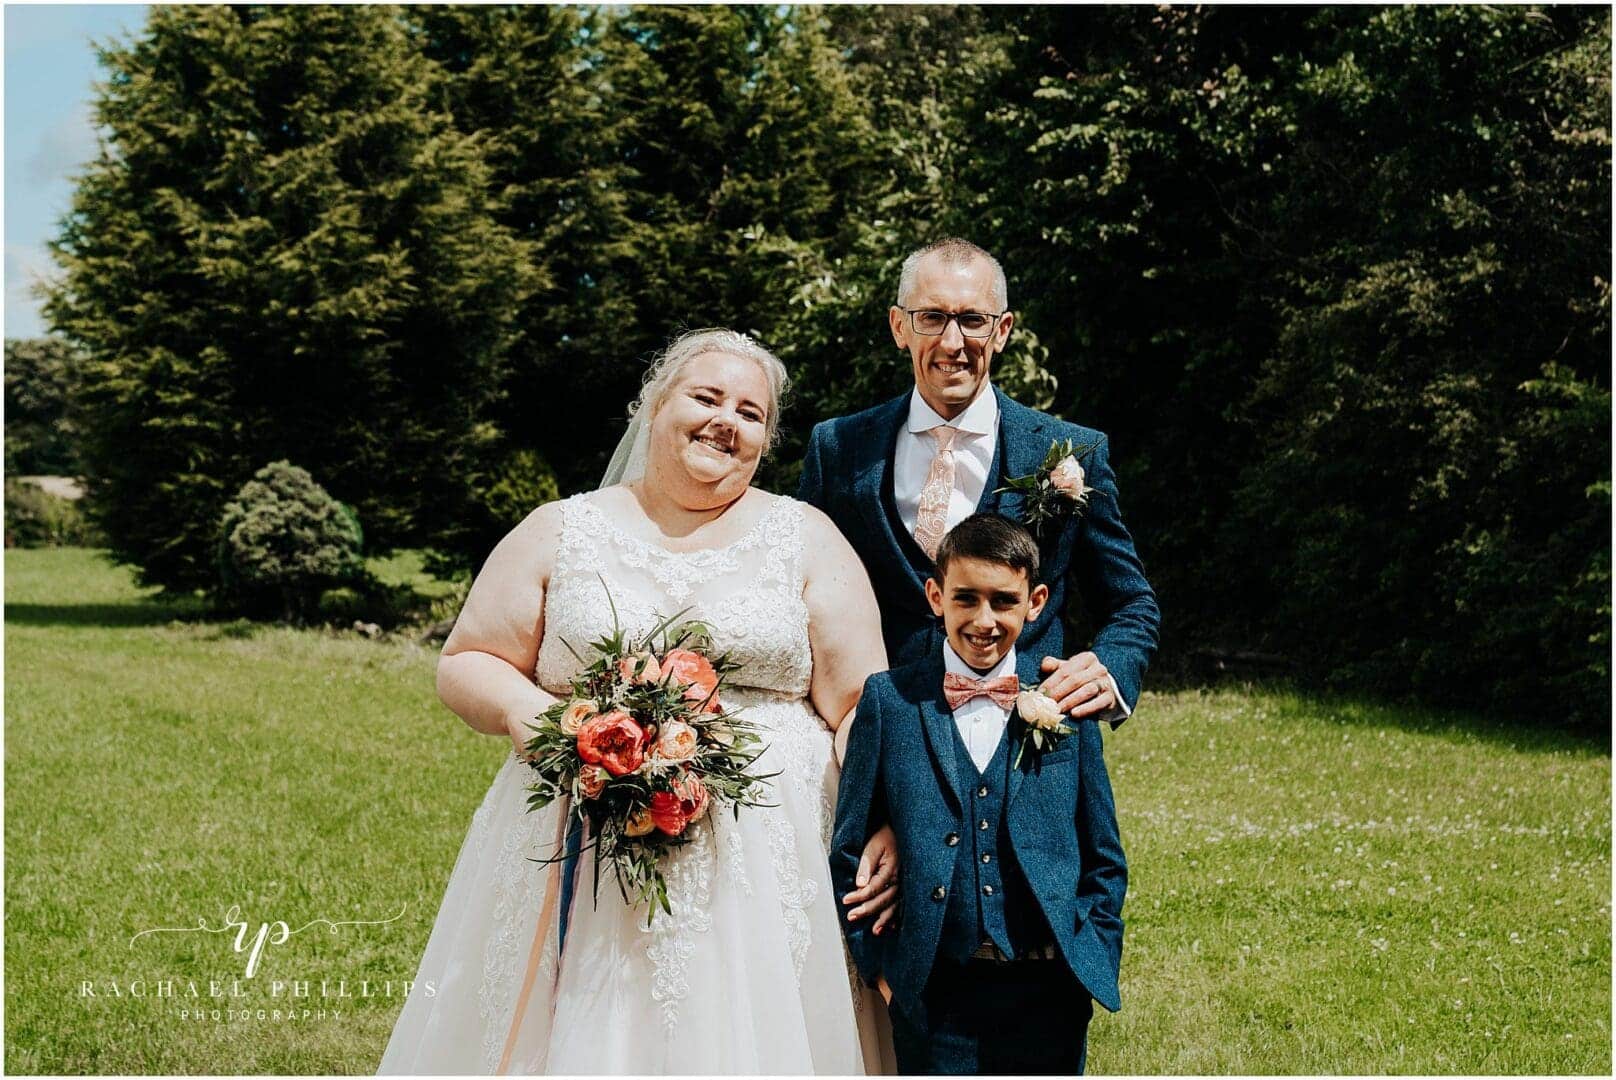 beautiful family photo of the bride and groom with their son on there wedding day.